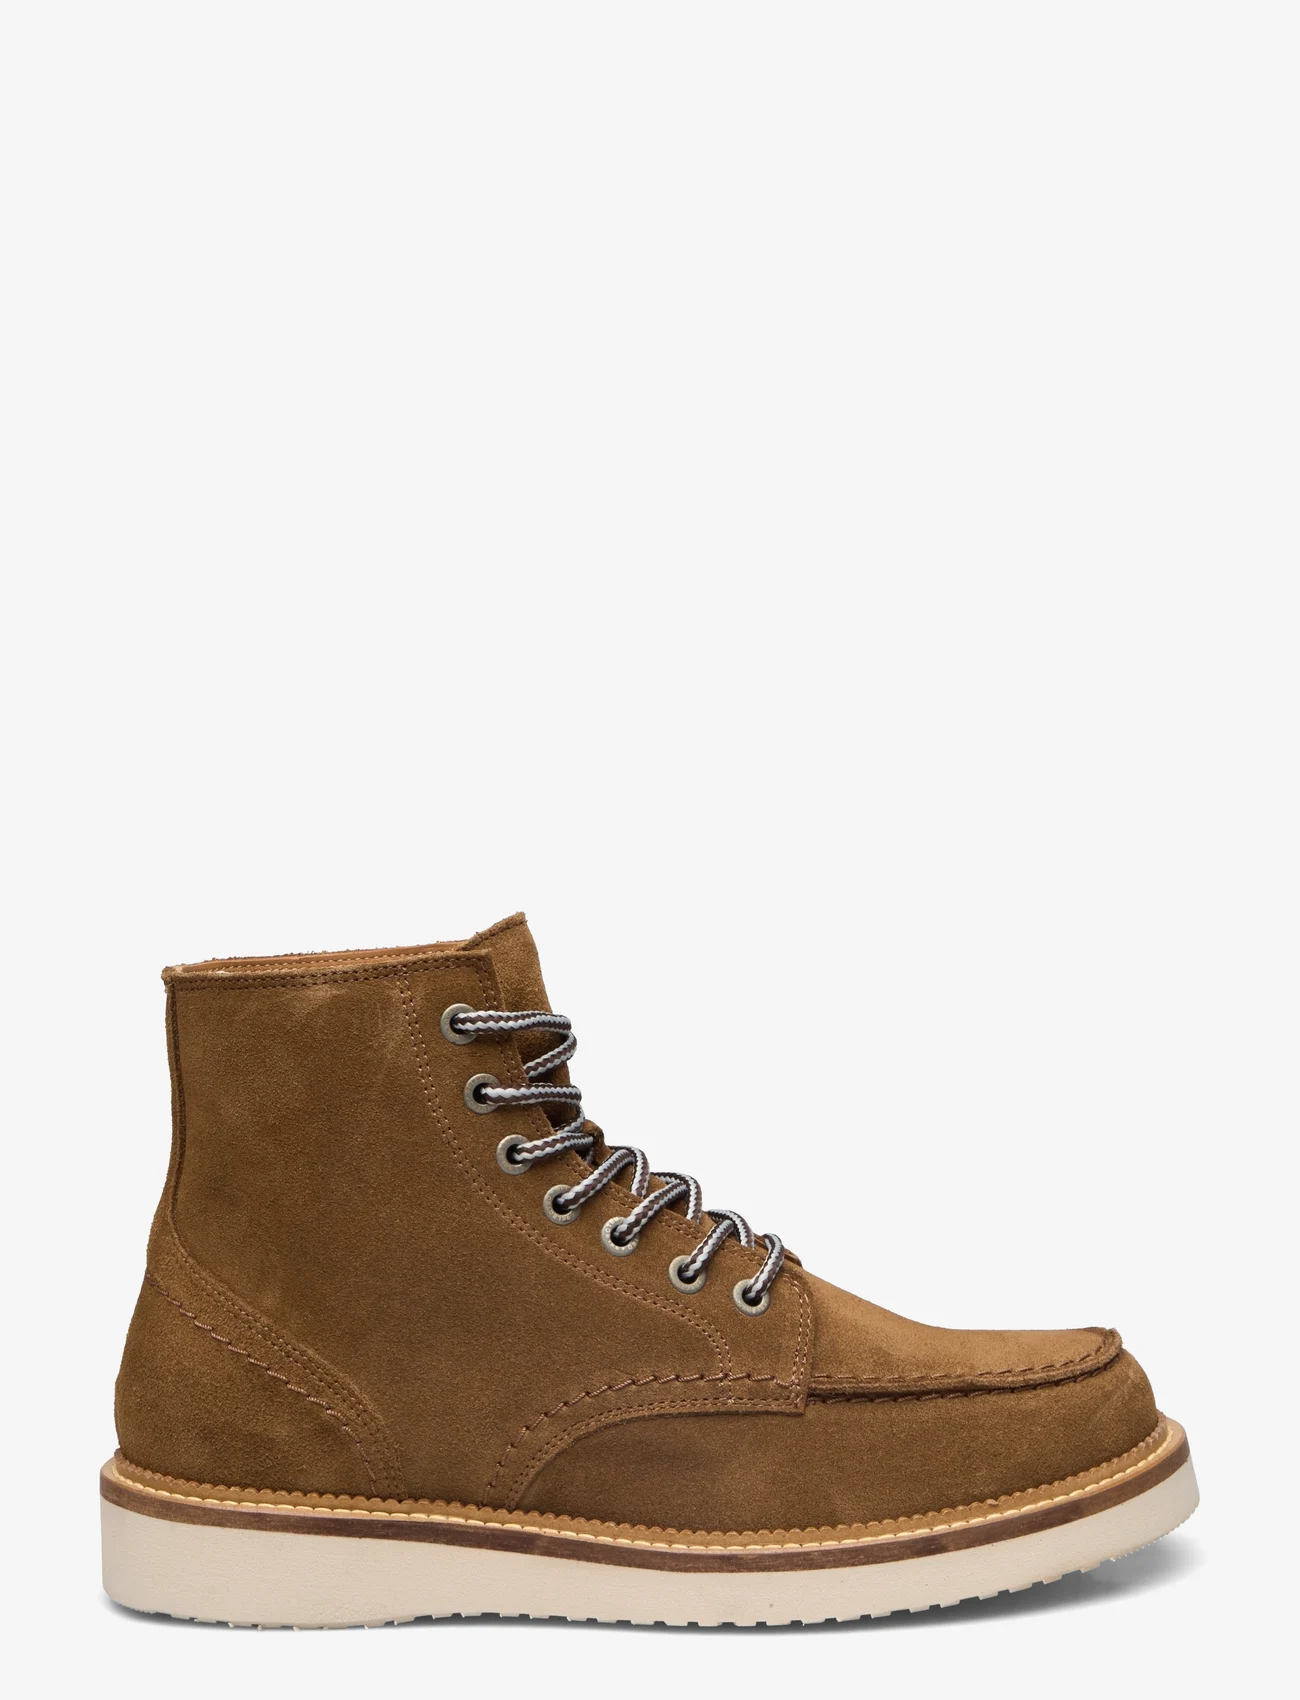 Selected Homme - SLHTEO NEW SUEDE MOC-TOE BOOT B - sznurowane - tobacco brown - 1